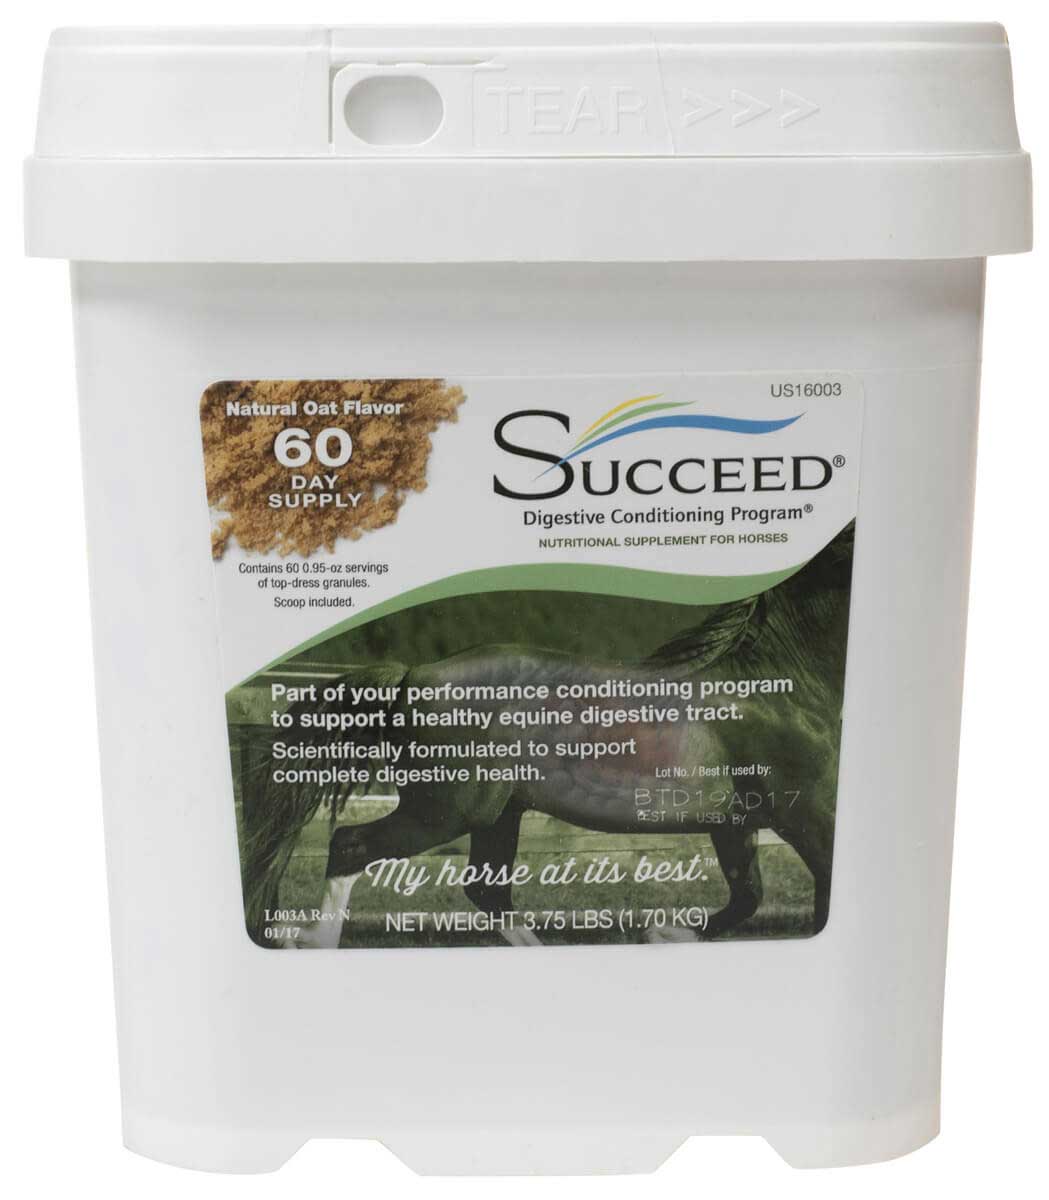 Succeed Digestive Conditioning Supplement for Horses - Equine Exchange Tack Shop